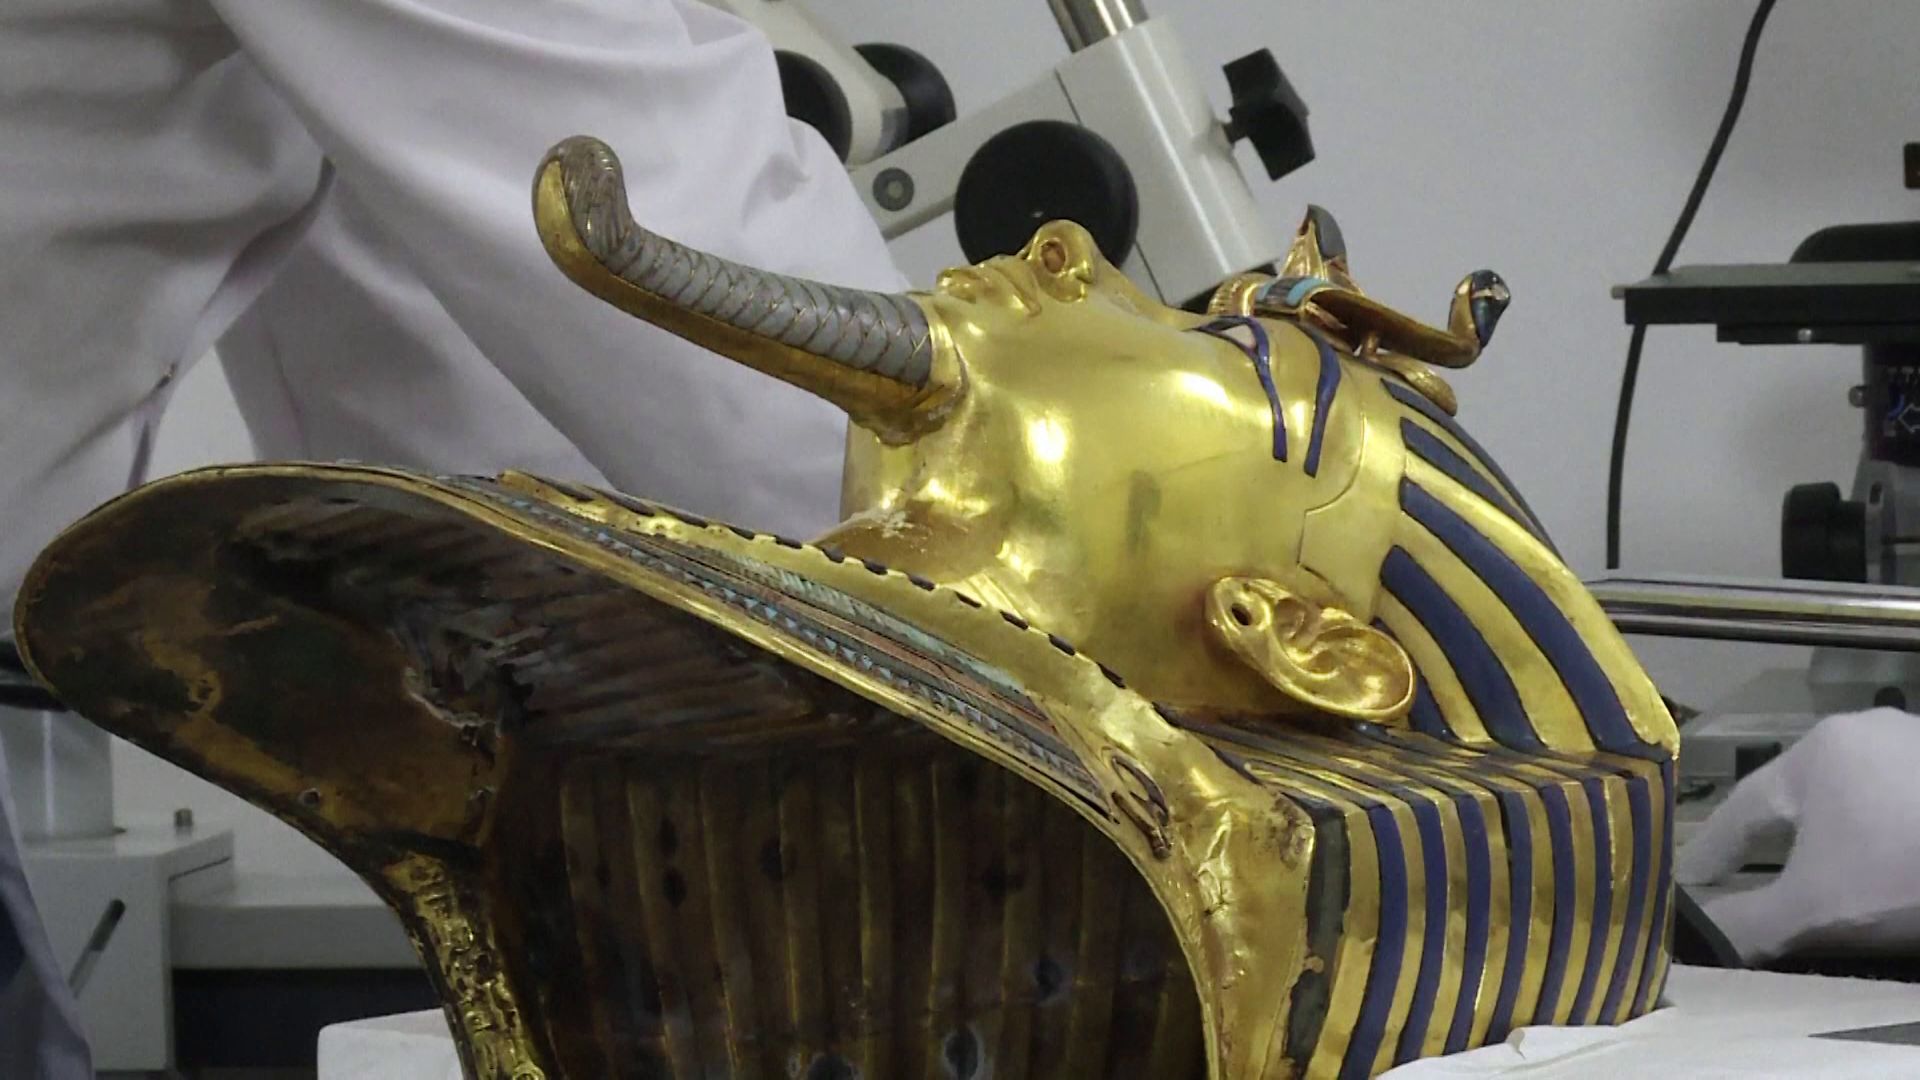 Henkel’s adhesives experts helped restore the pharaoh’s mask.